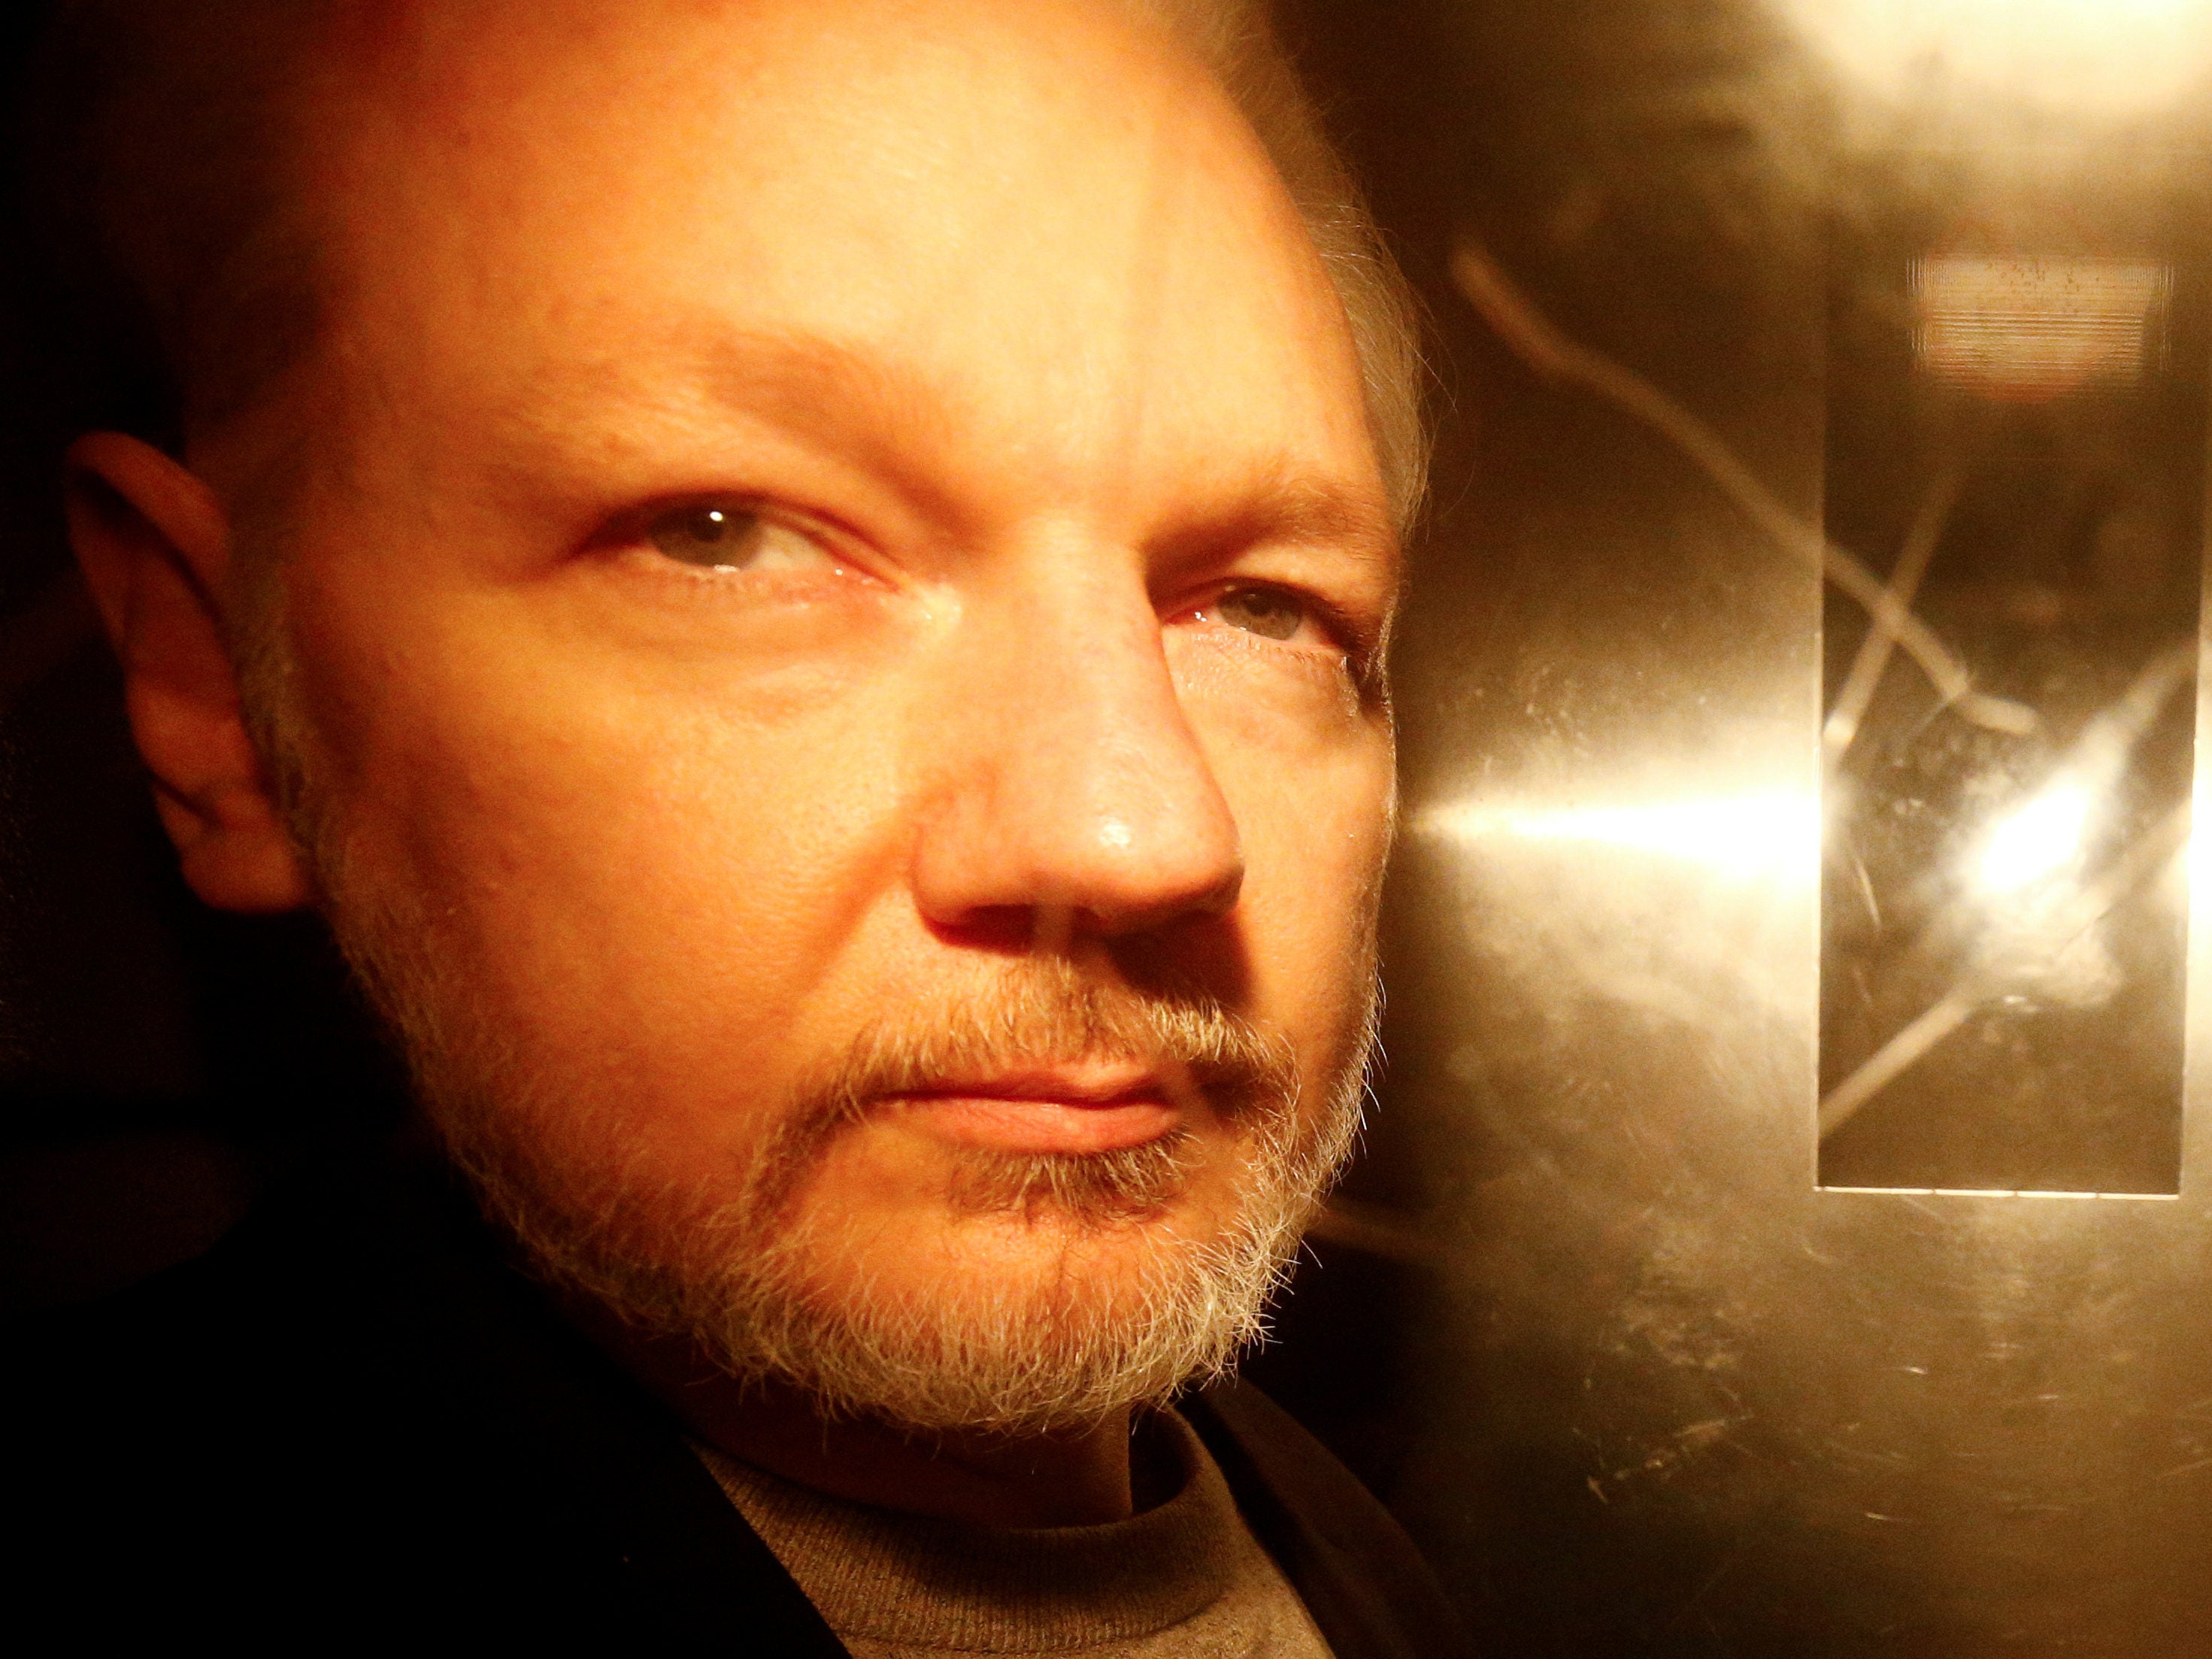 Julian Assange unable to appear at court after move to prison medical ward